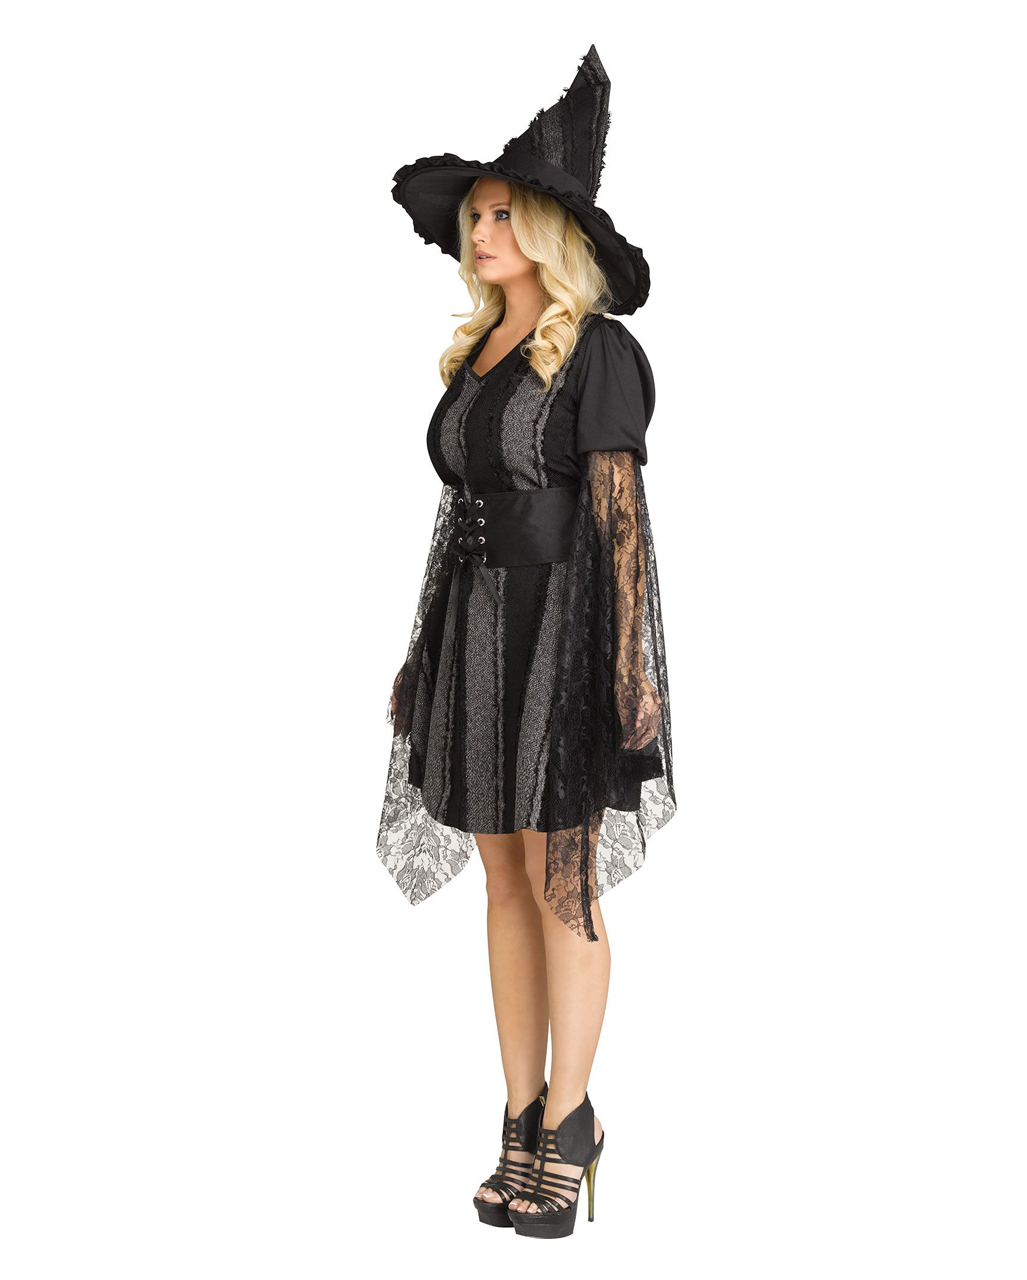 Stitch Witch Costume For Ladies on Halloween